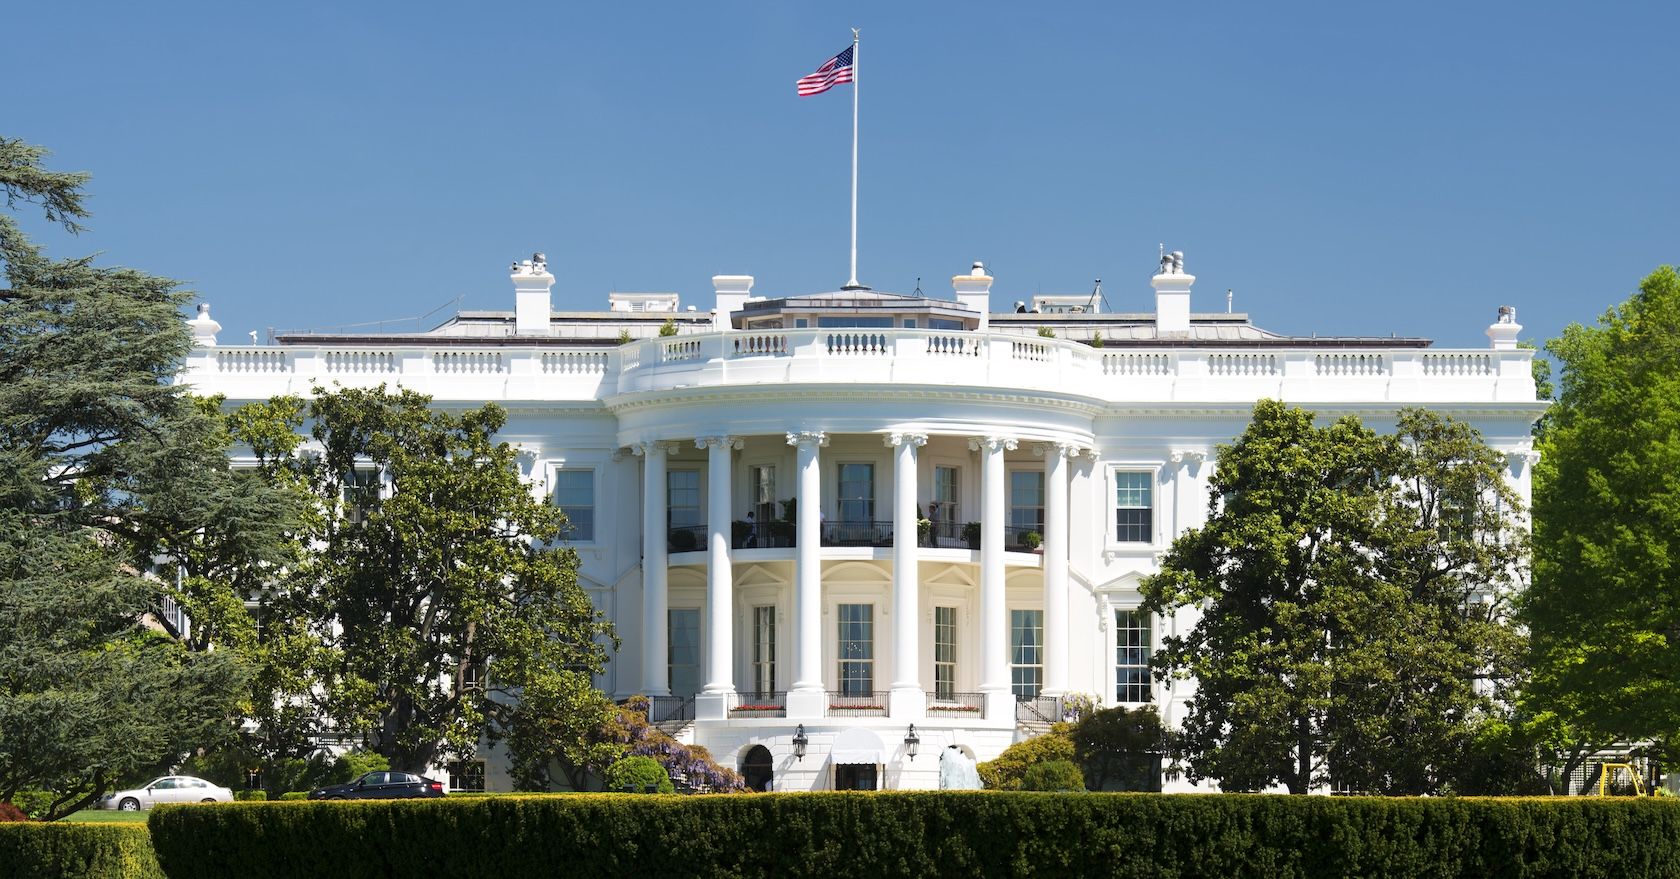 The White House, a wide white building with tall windows, columns, and a US flag.